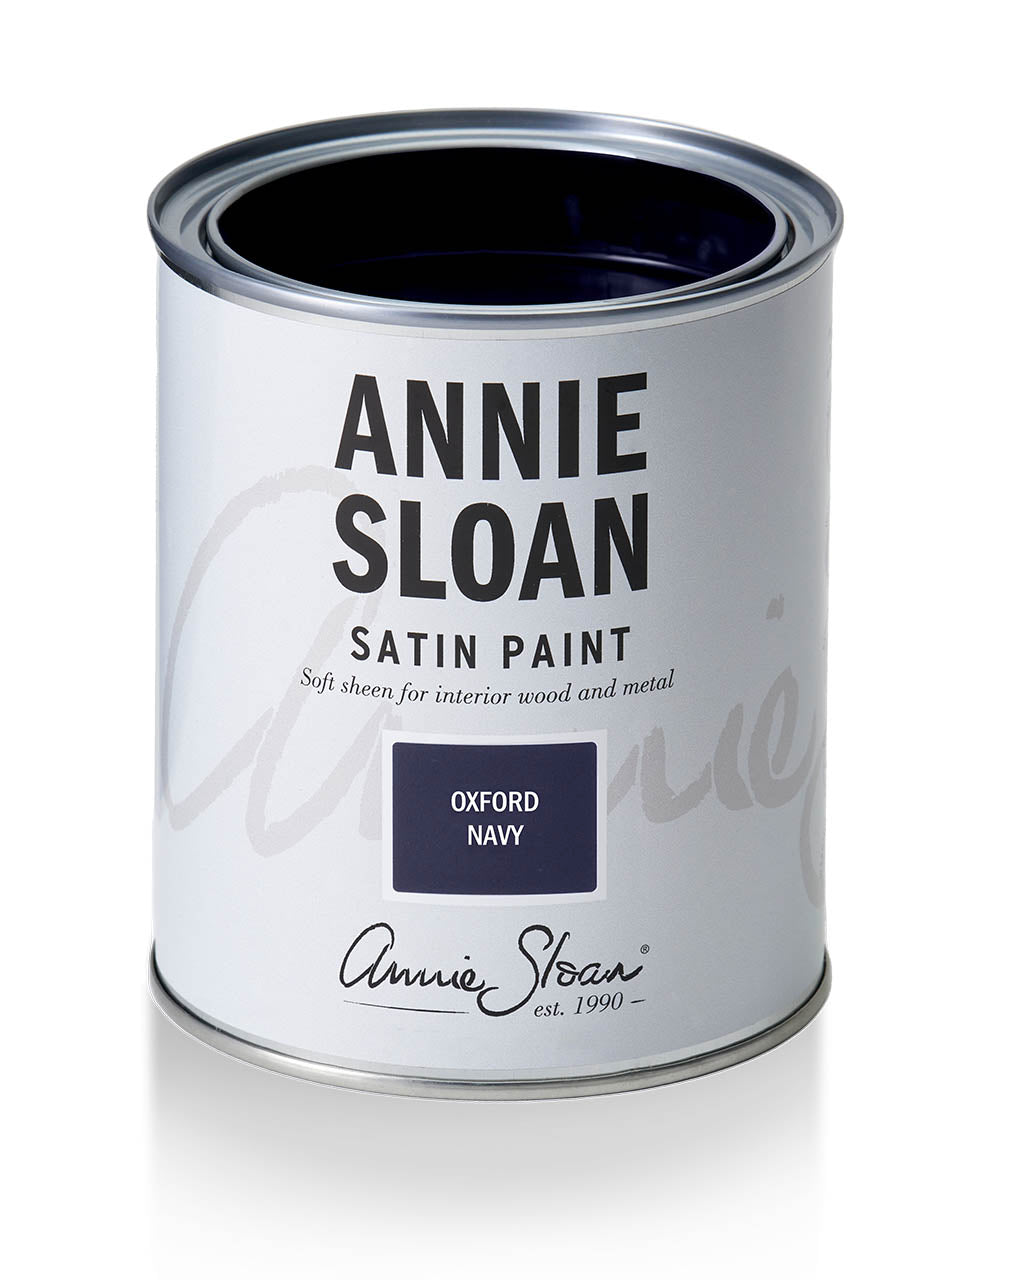 Oxford Navy Satin Paint by Annie Sloan